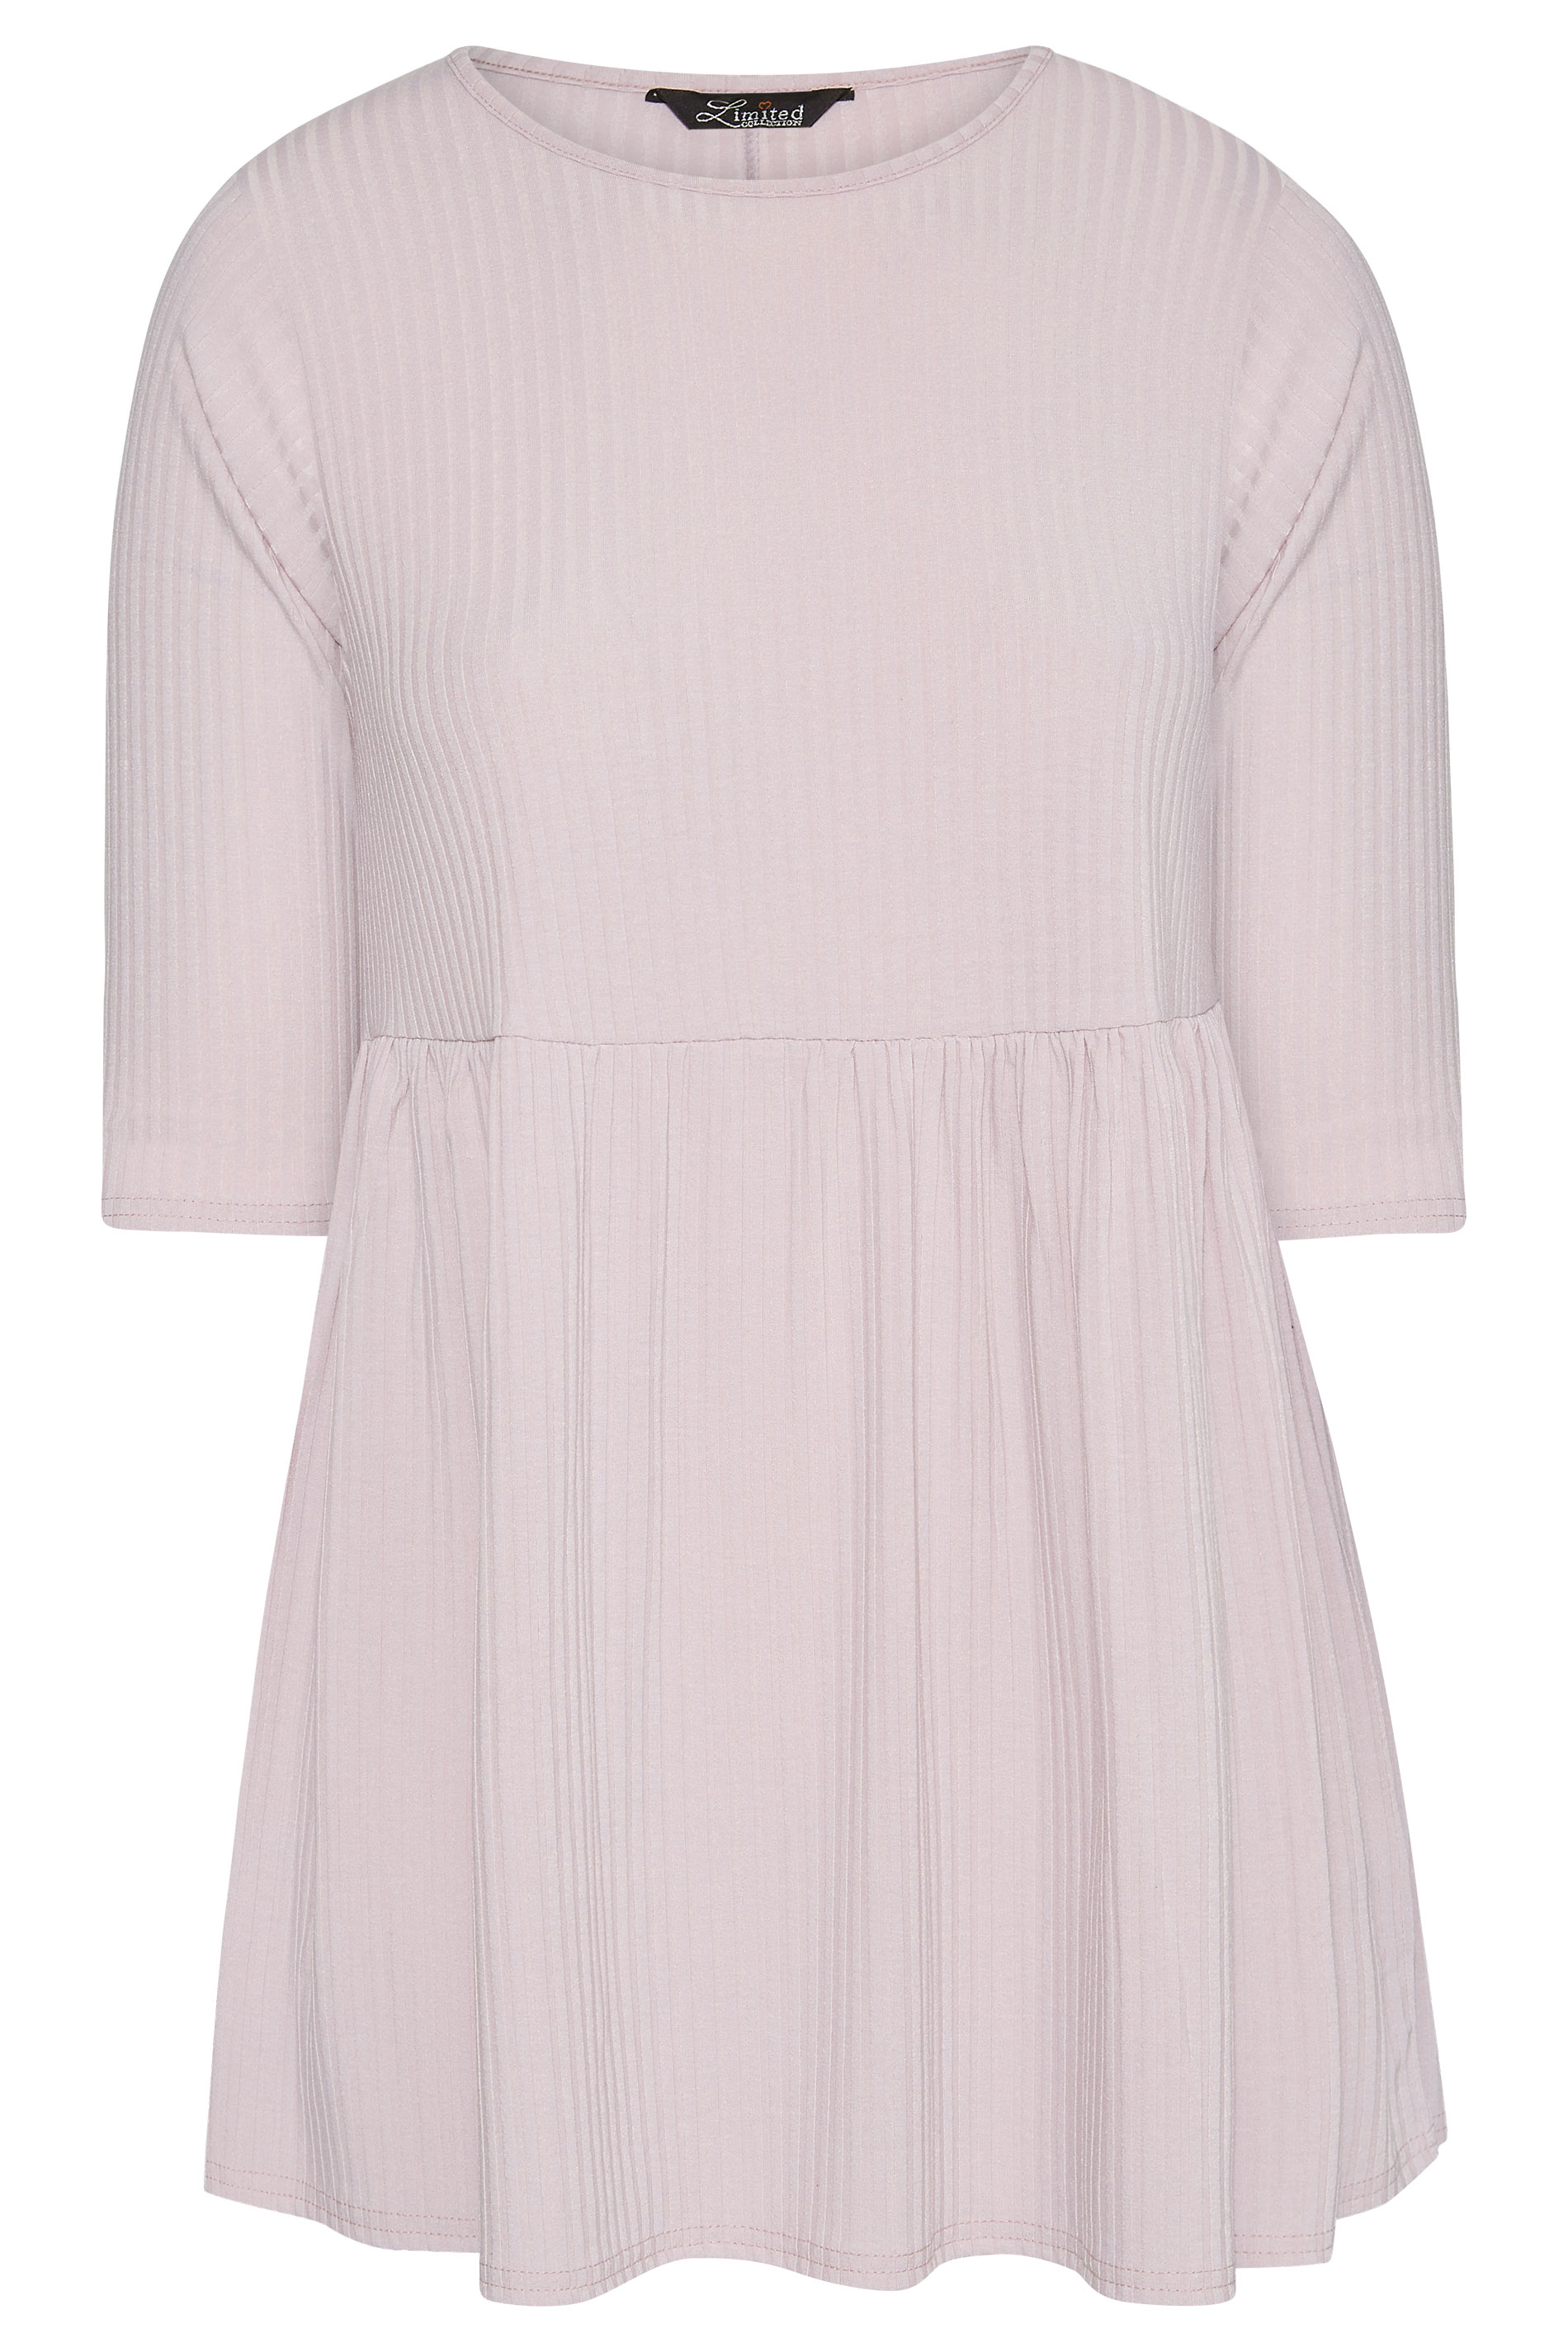 LIMITED COLLECTION Pastel Pink Ribbed Smock Top_F.jpg